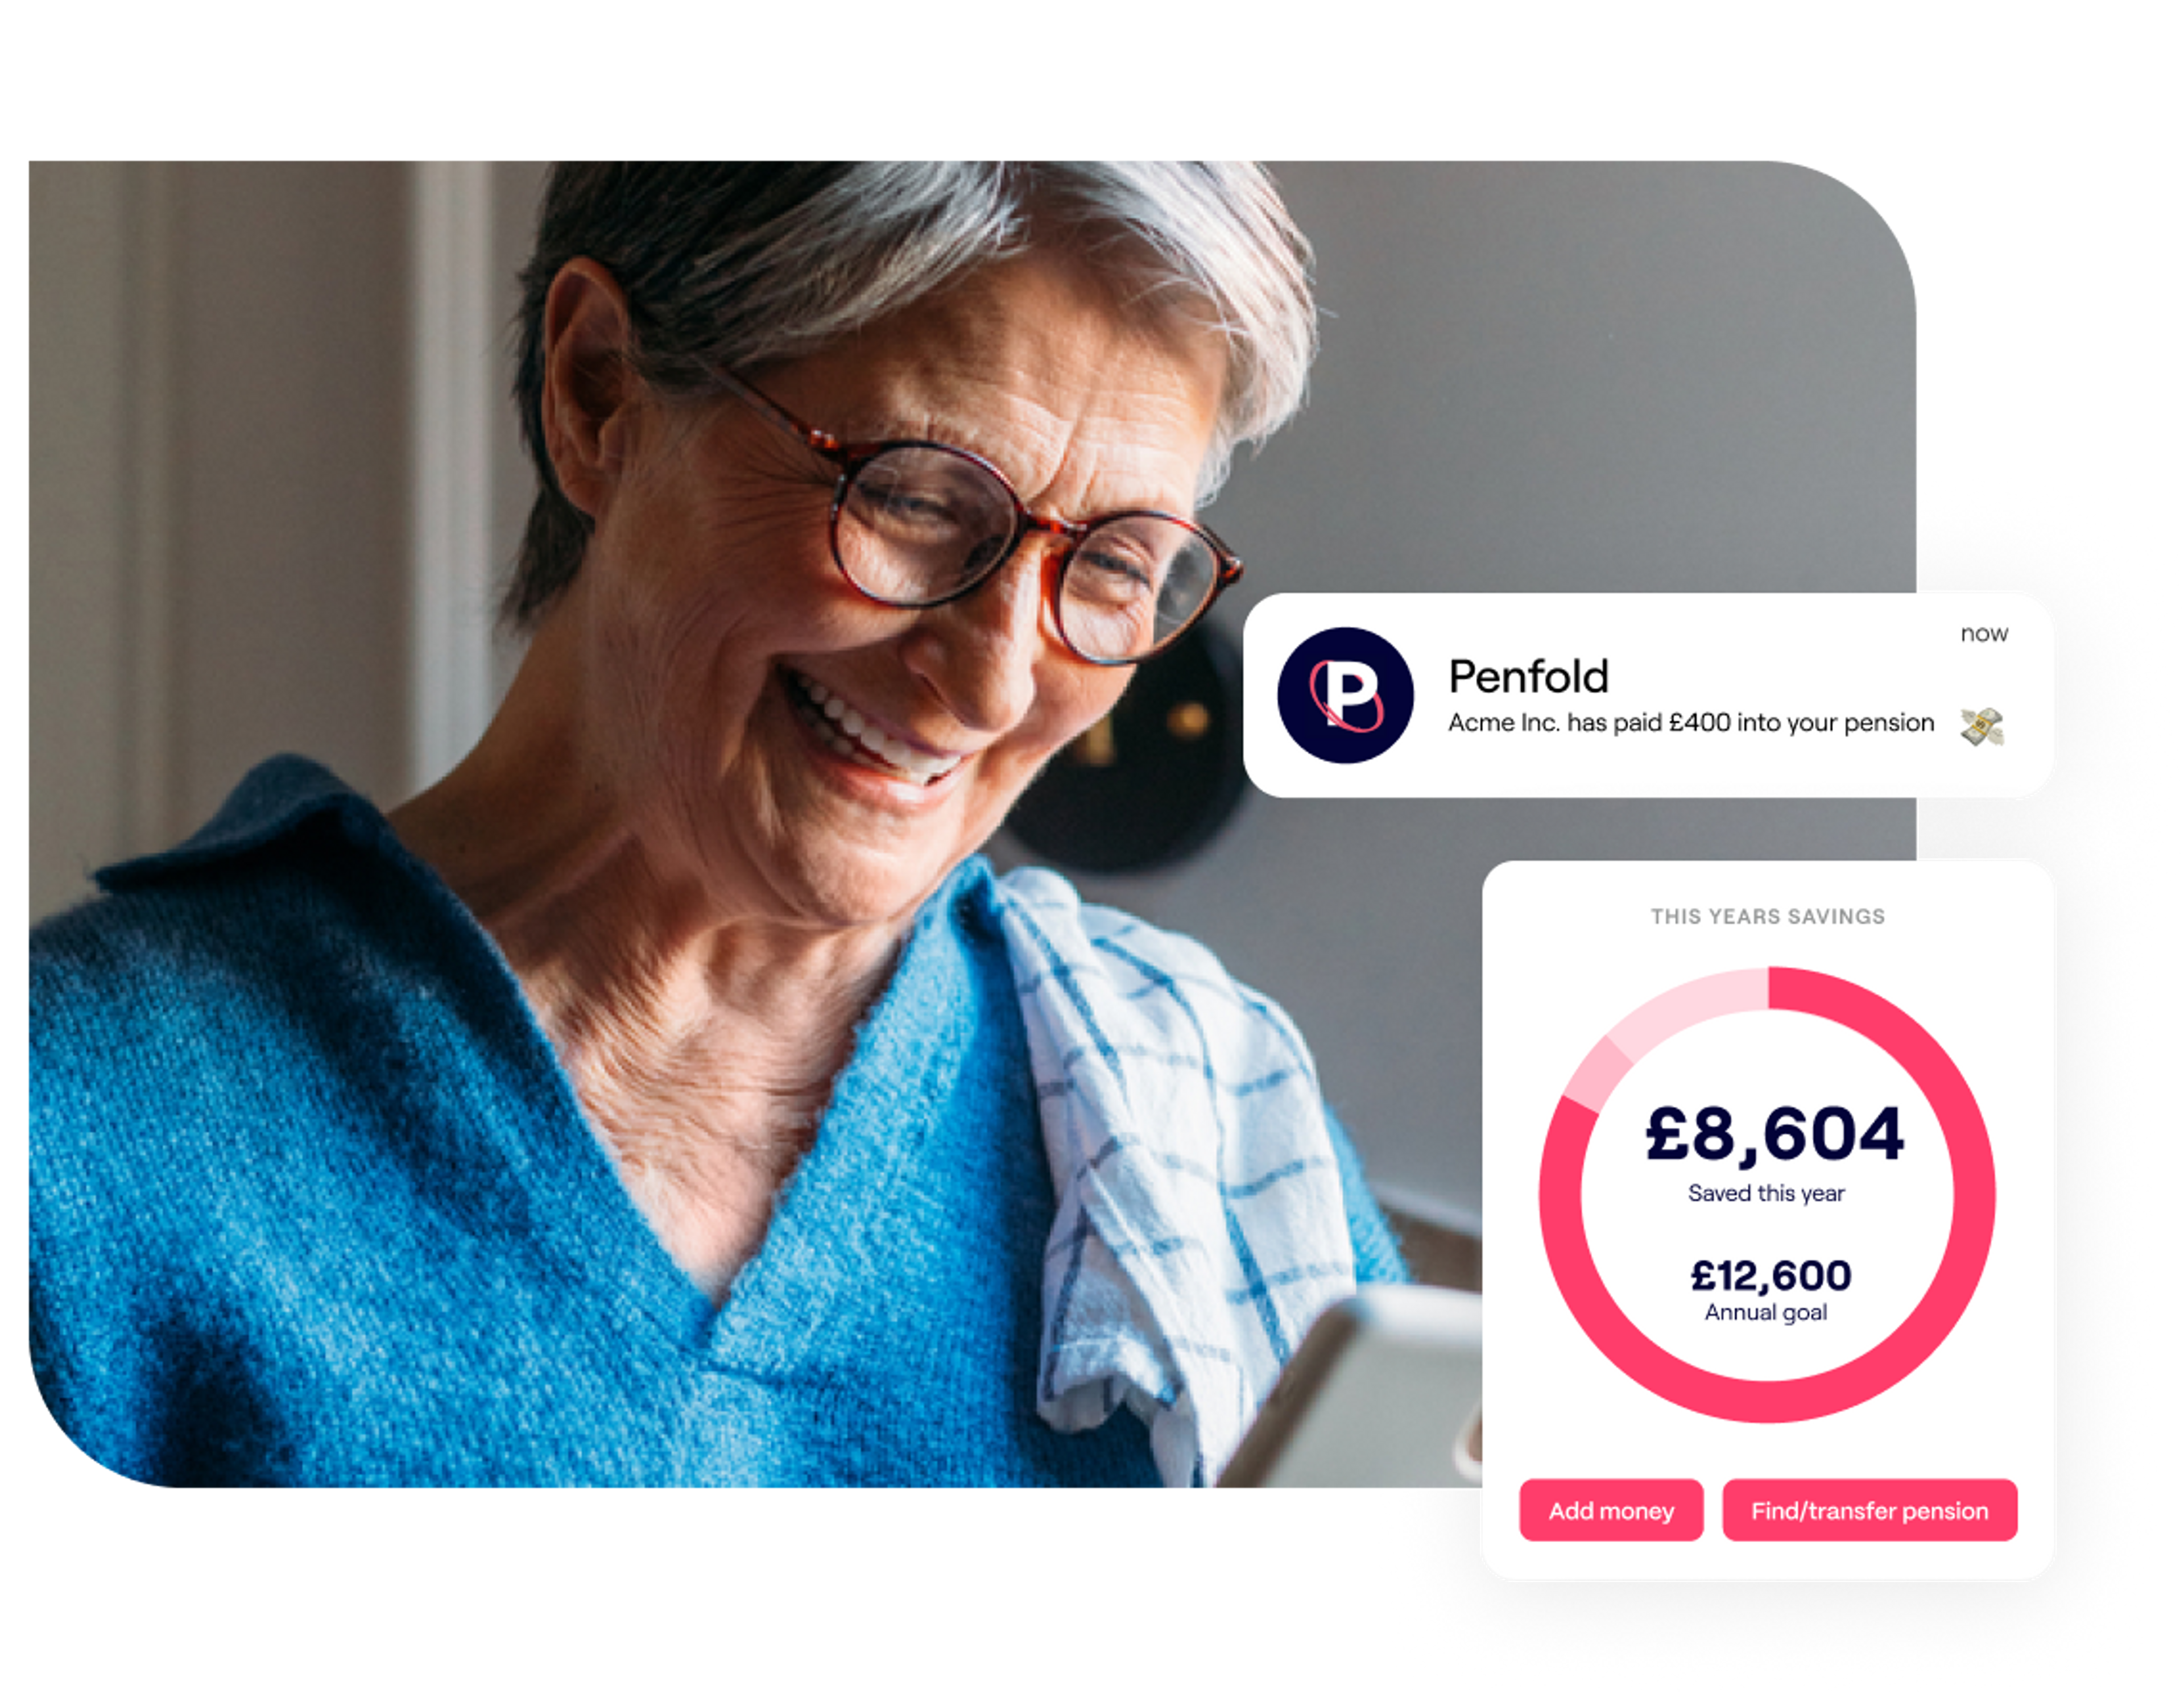 A photo of a woman looking at a tablet and excerpts of the Penfold pension app showing savings and contribution screens